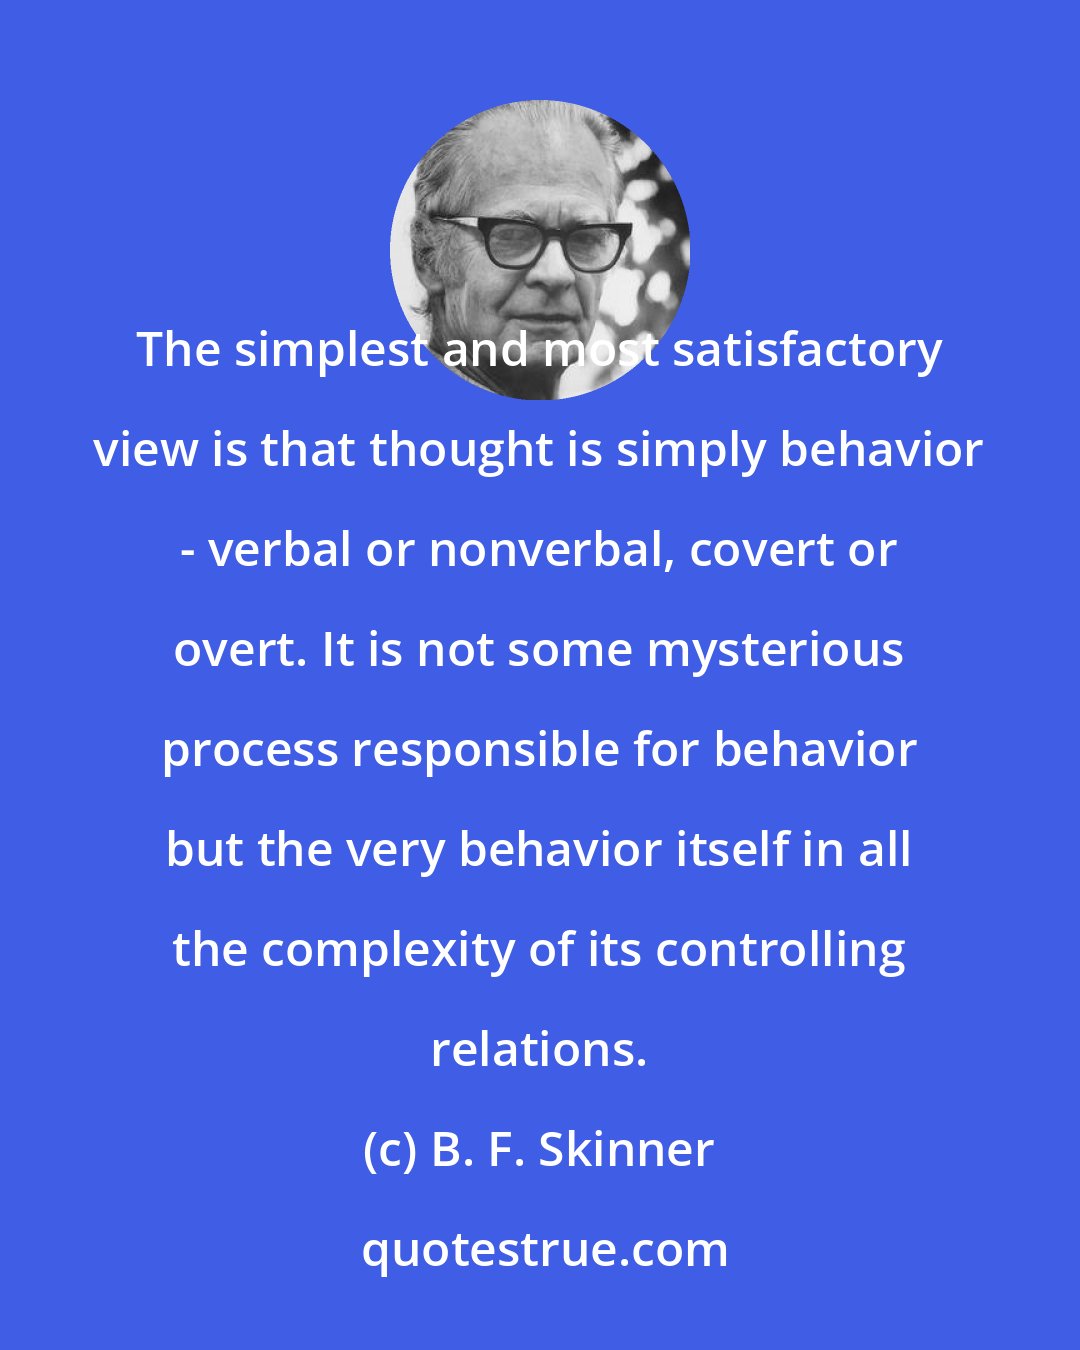 B. F. Skinner: The simplest and most satisfactory view is that thought is simply behavior - verbal or nonverbal, covert or overt. It is not some mysterious process responsible for behavior but the very behavior itself in all the complexity of its controlling relations.